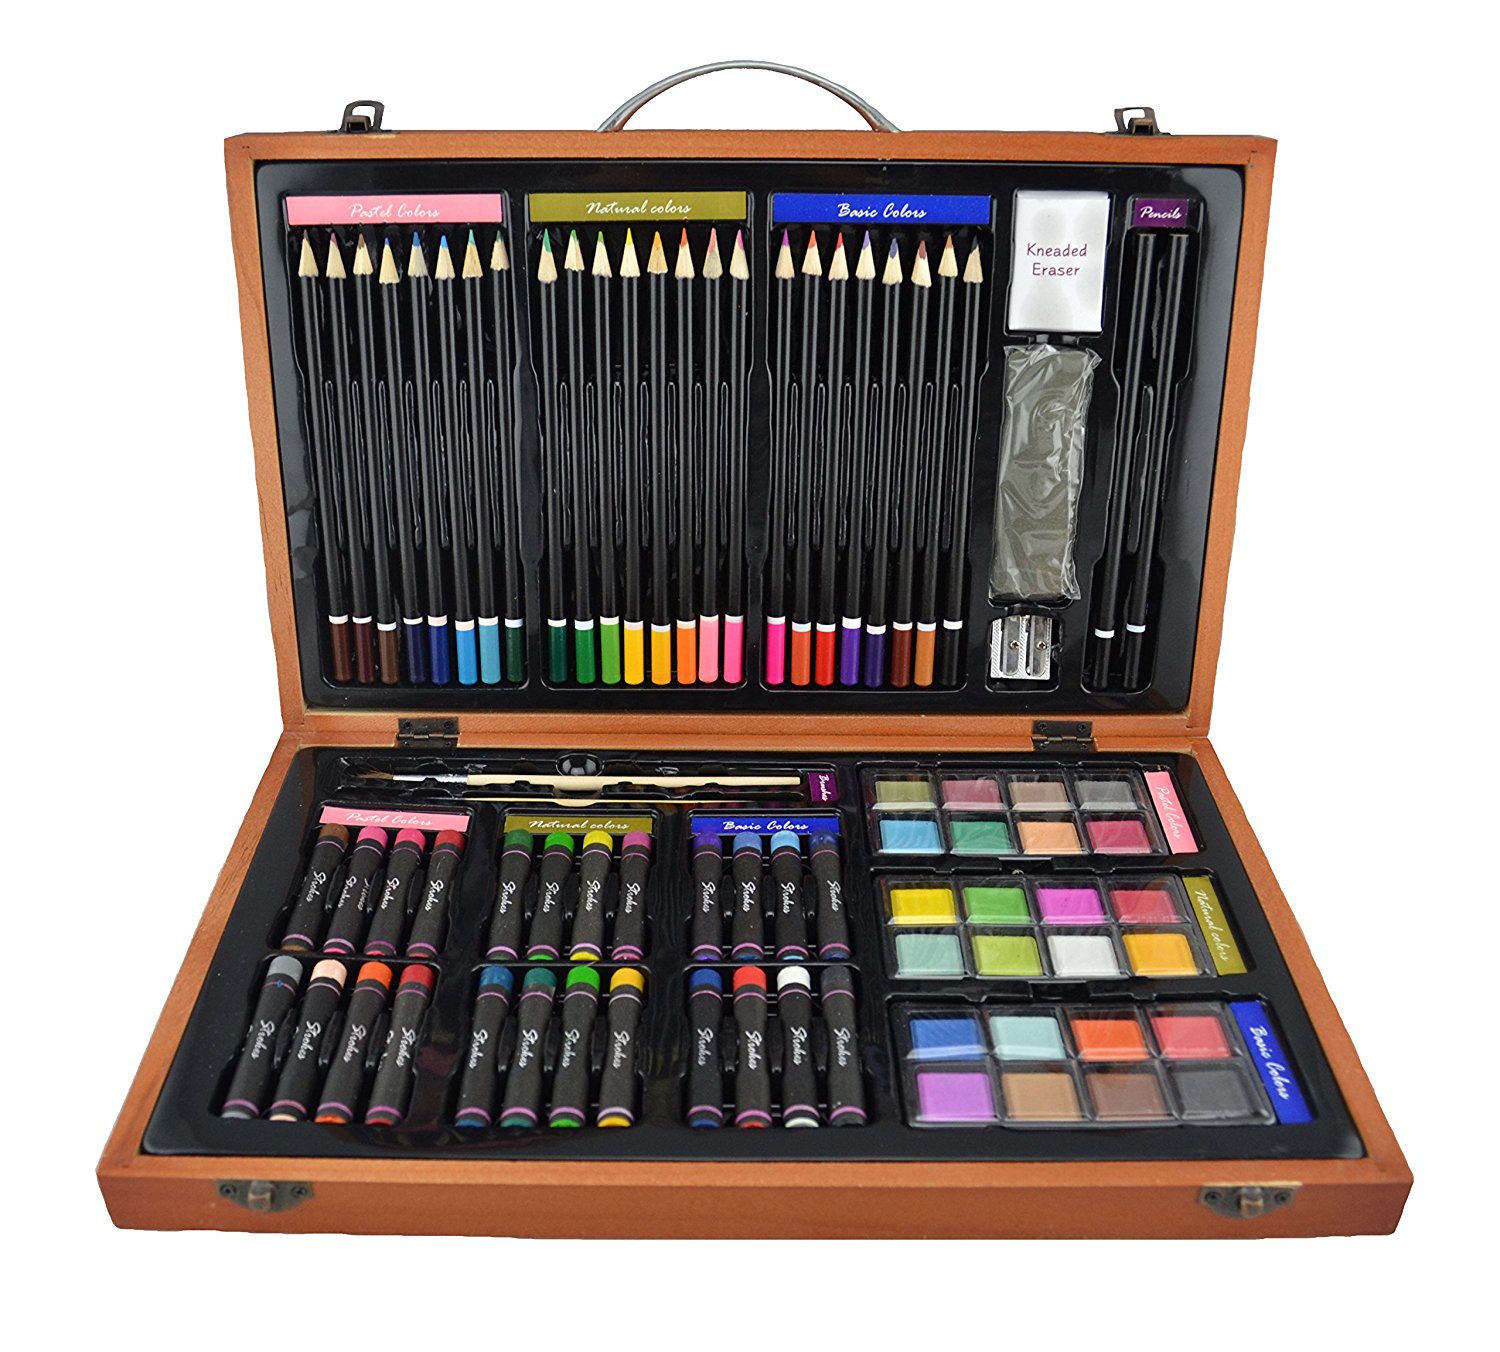 Strokes Art Supplies Deluxe Art Set for Drawing and Painting (80Piece